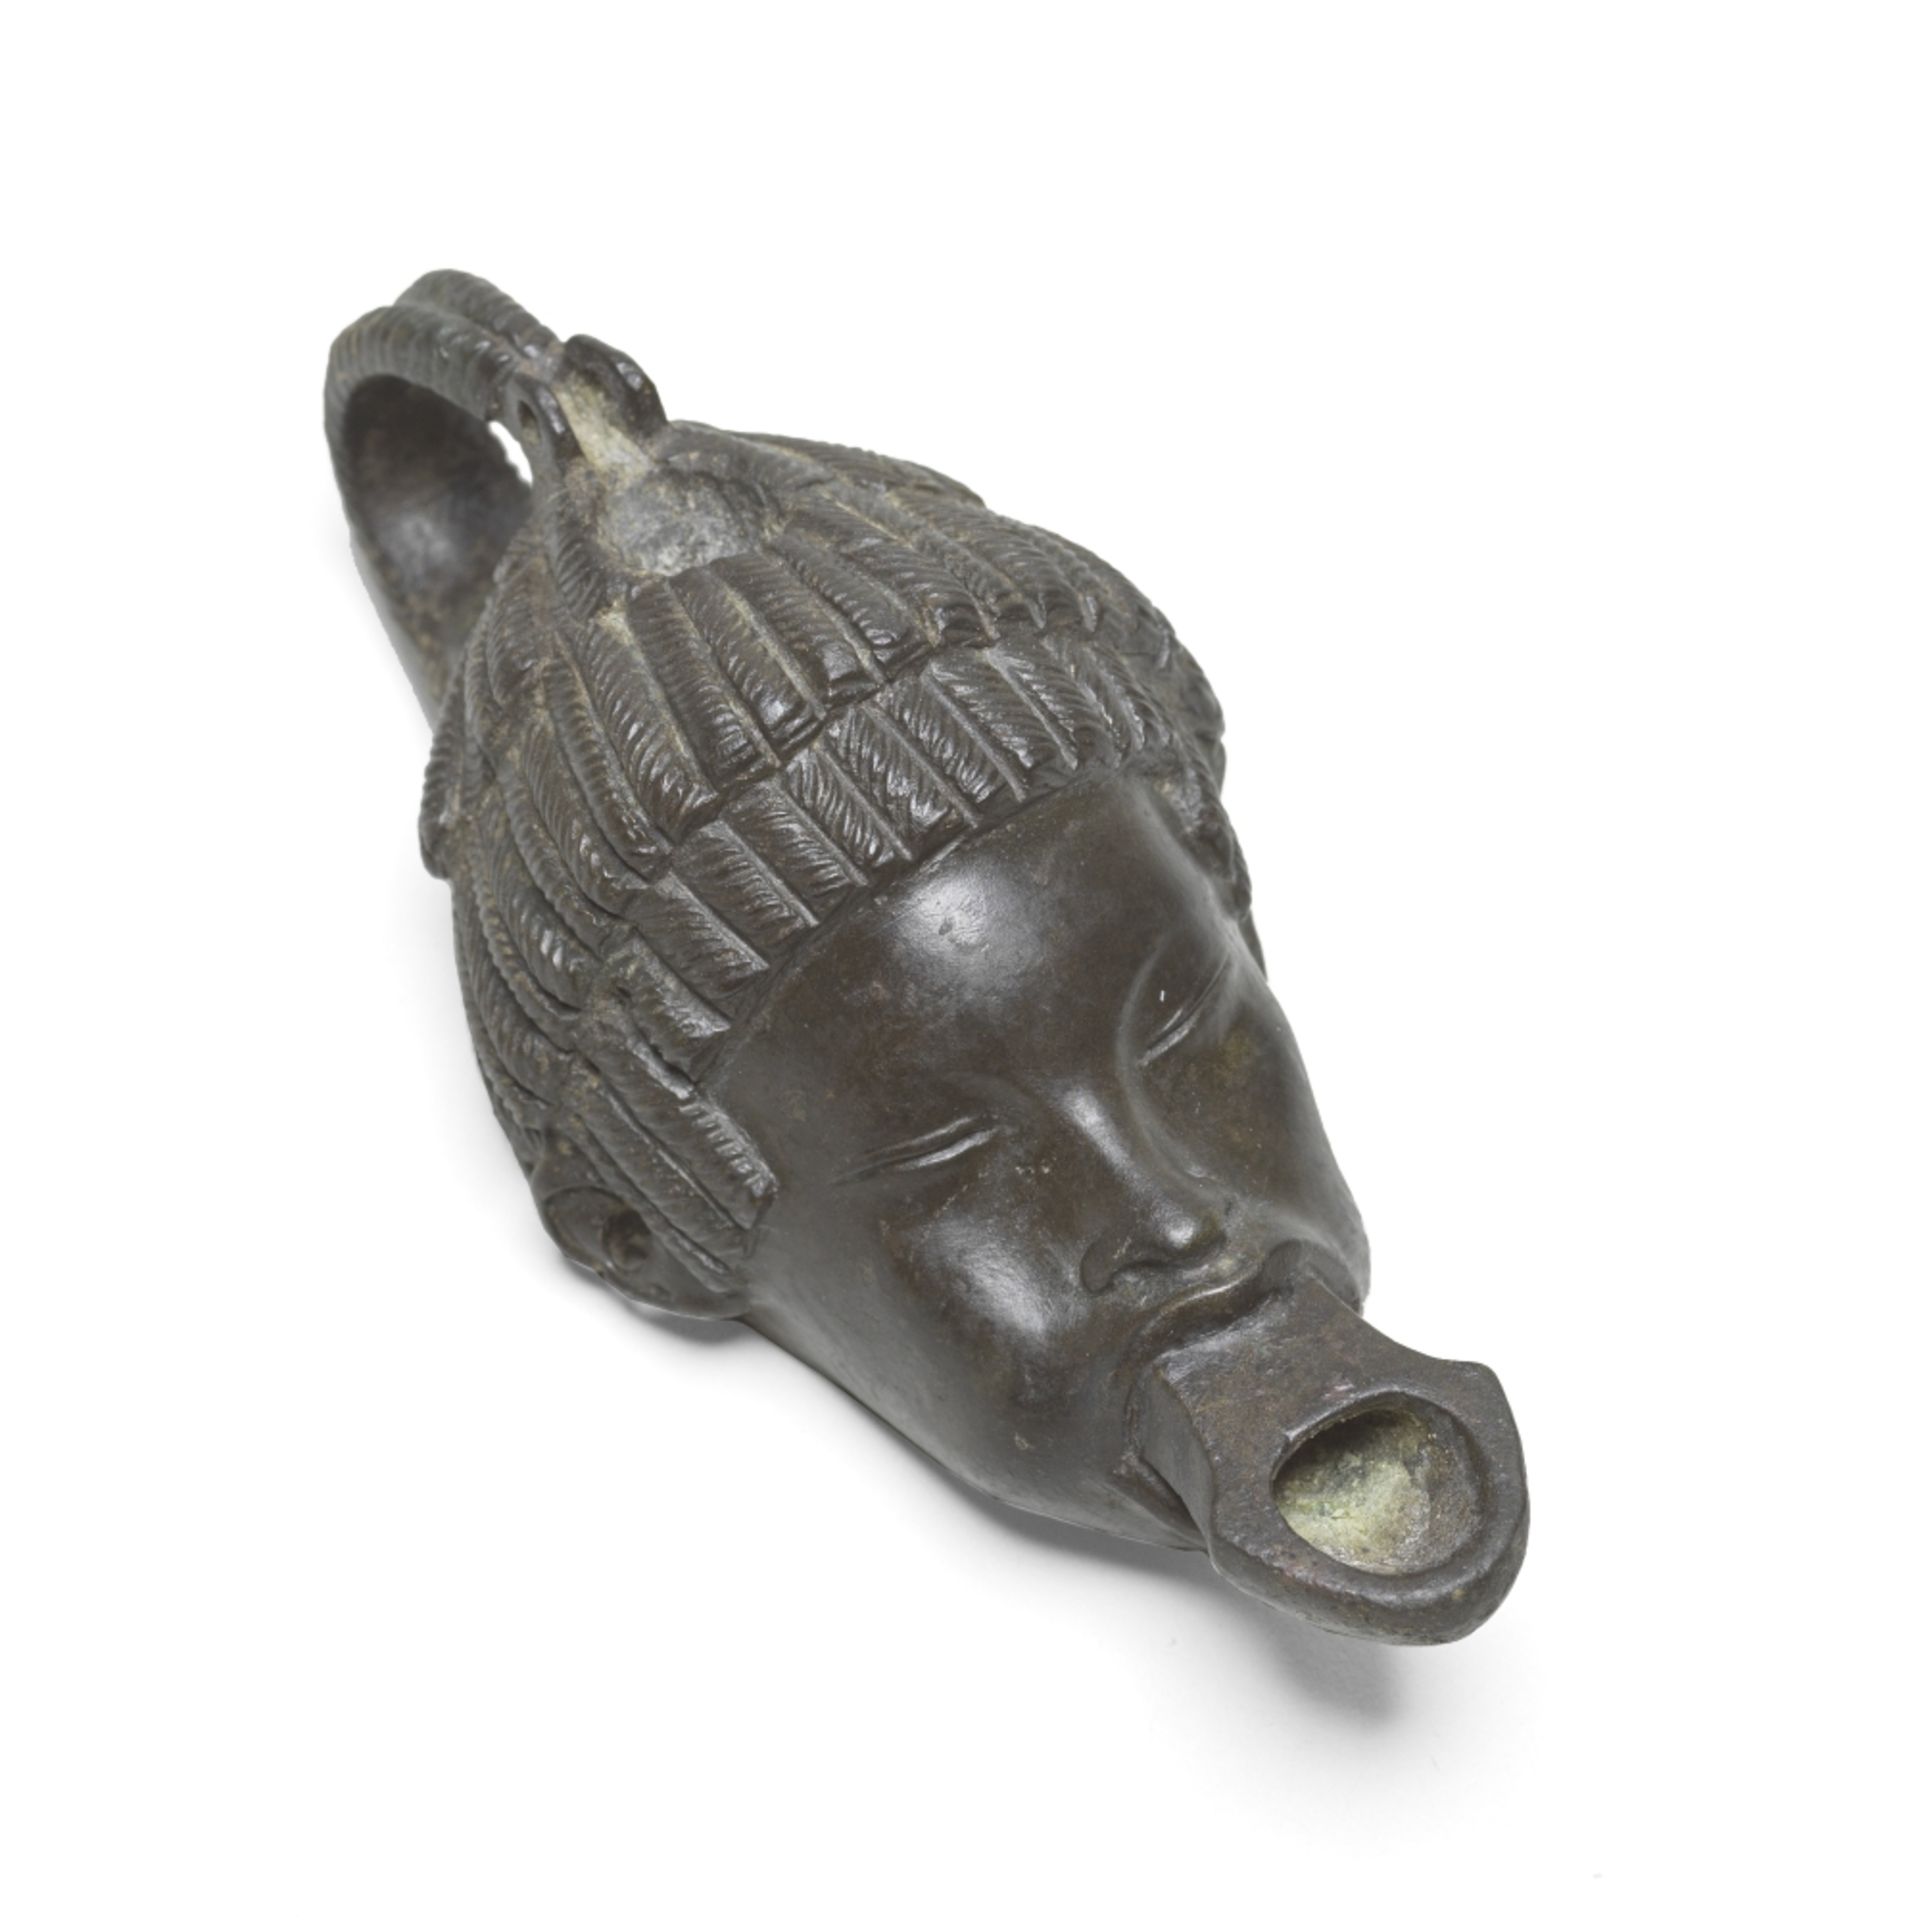 A Roman bronze lamp in the form of the head of an African